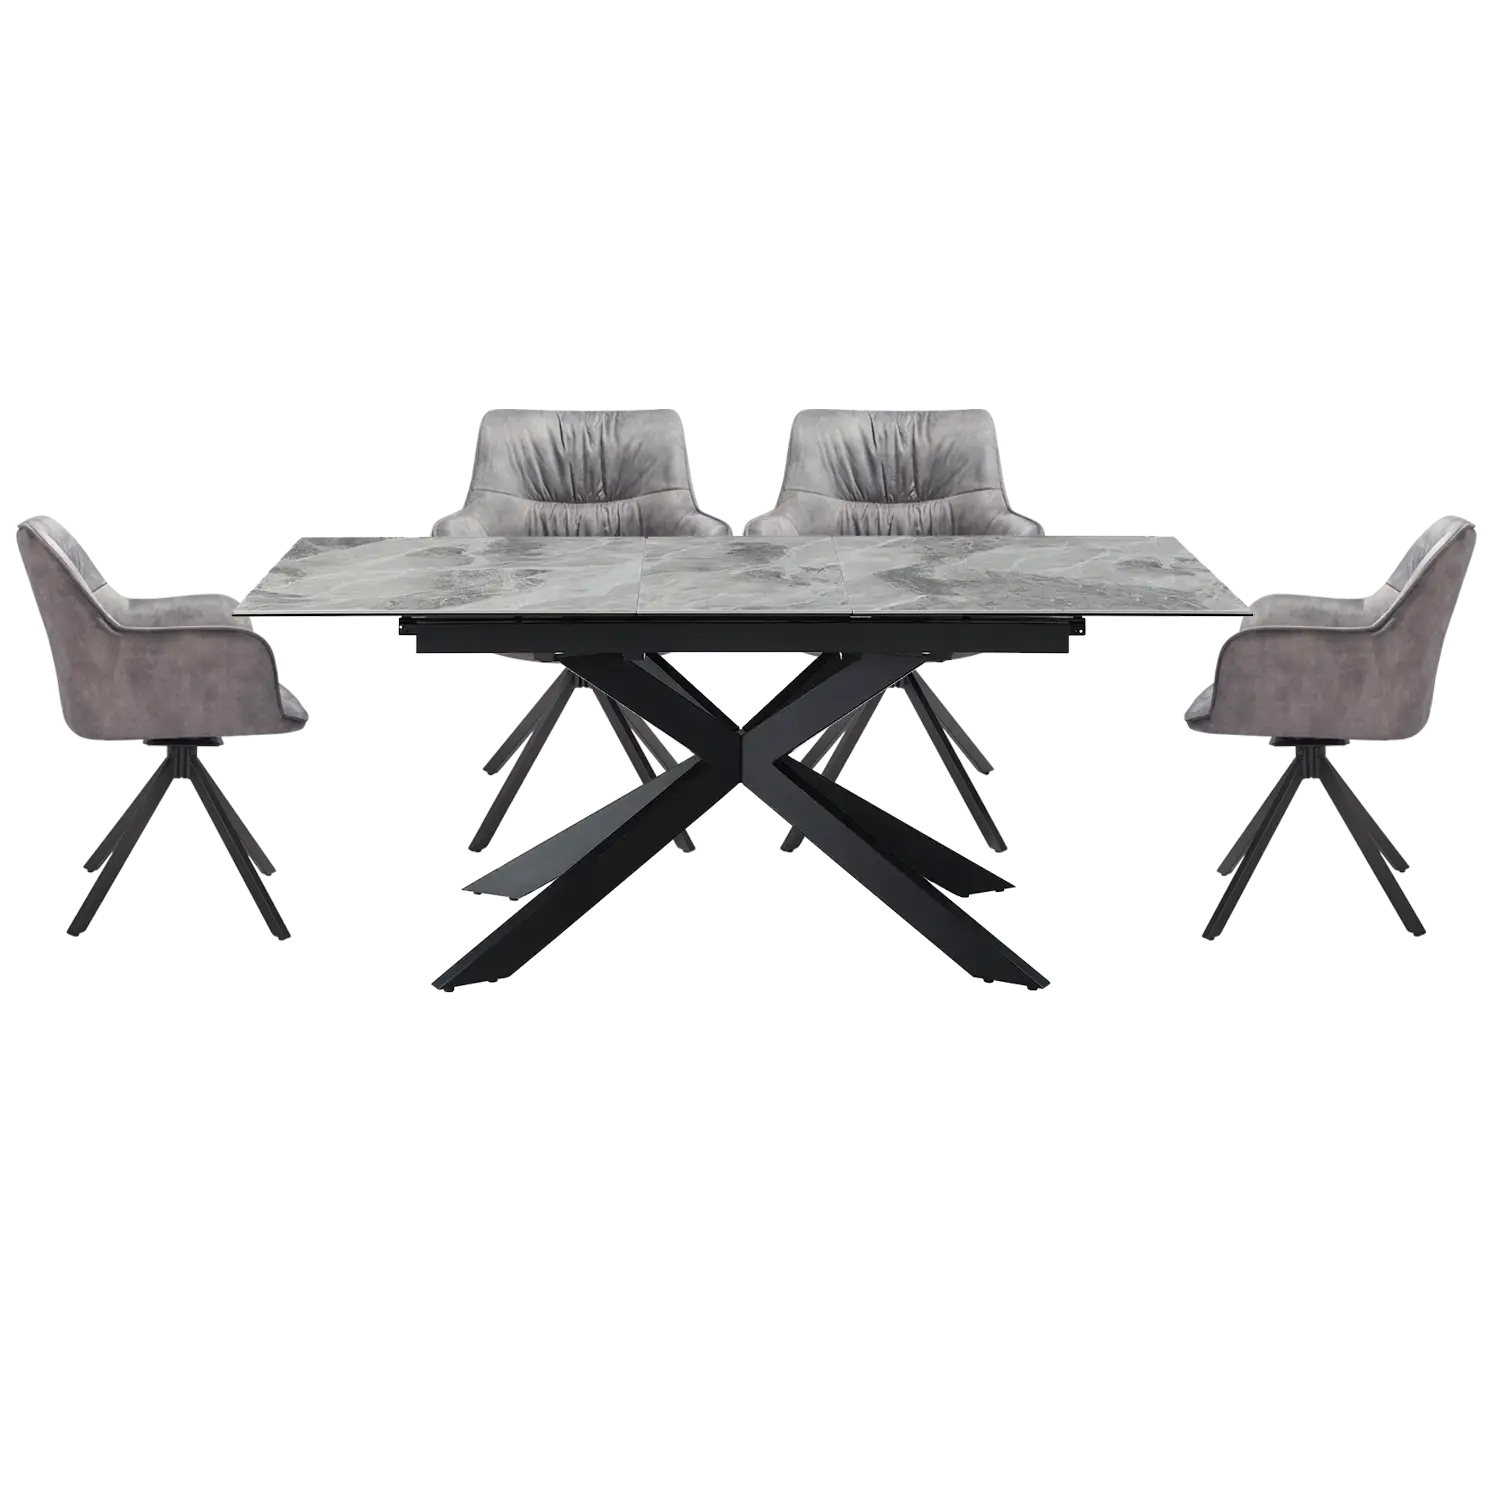 Creed Light Grey Ceramic Extendable Table with Marvel Silver Grey Chairs Dining Set